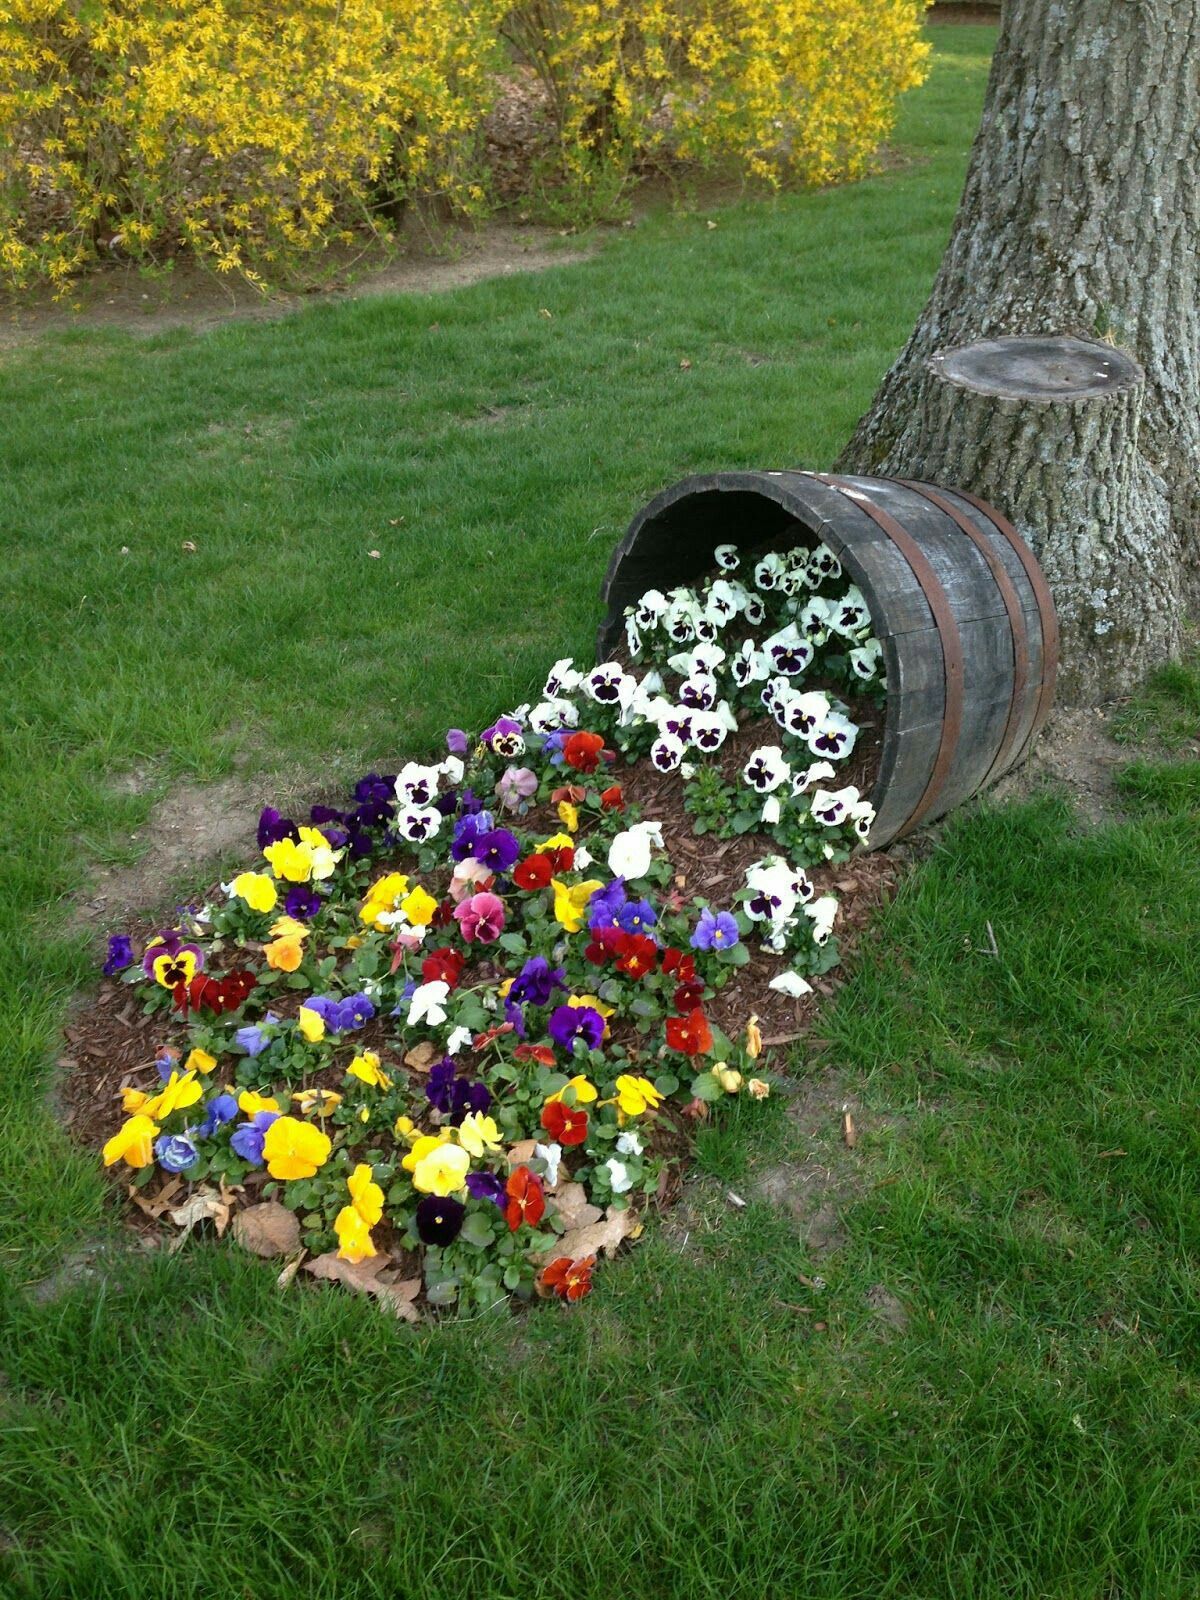 Weinfass Deko Garten Frisch I Would Like to Do This In the Corners Of the Front Yard by